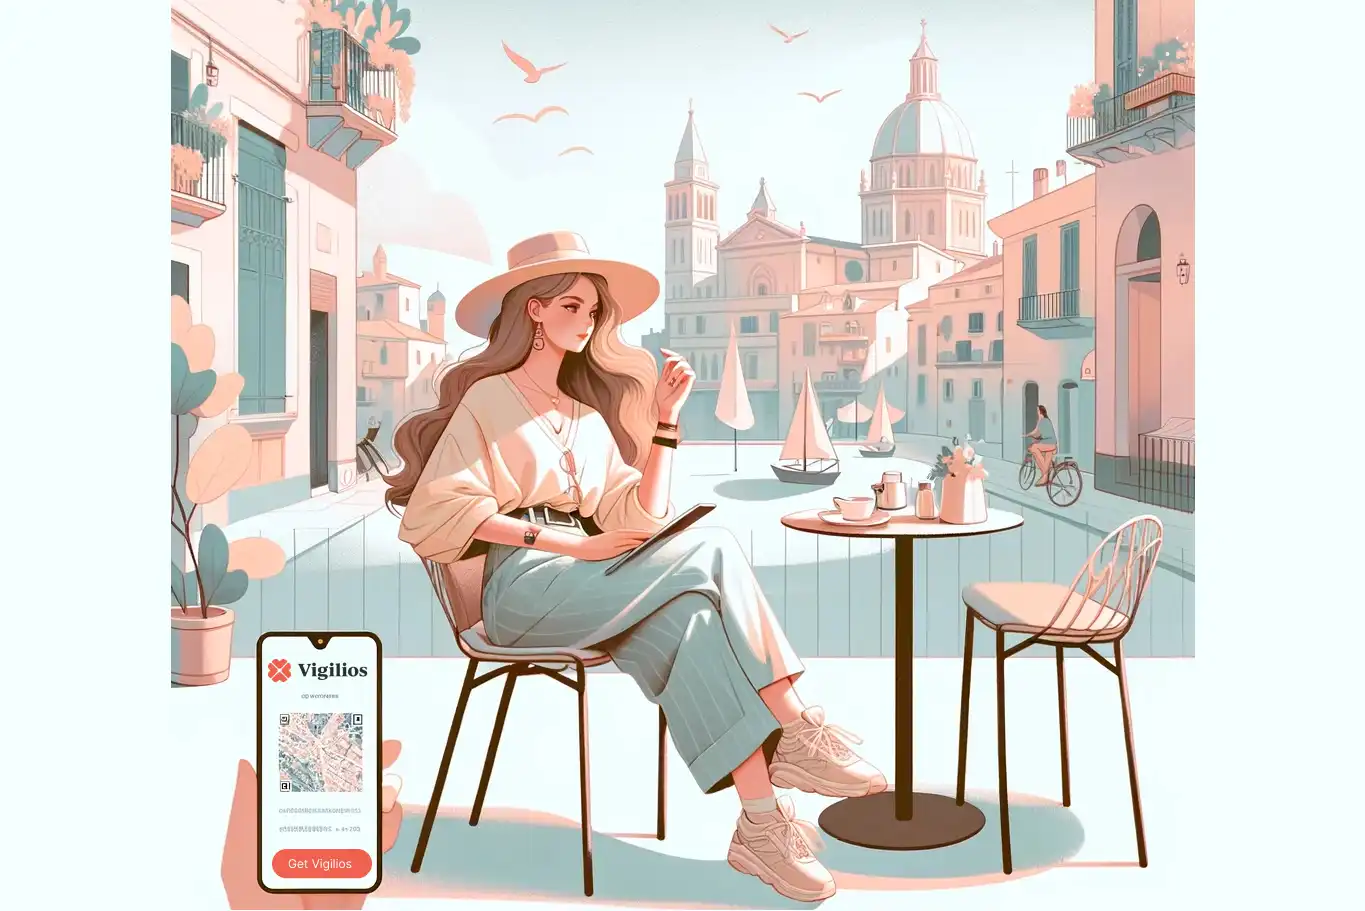 Woman sitting at a café table with an iPhone displaying the 'Vigilios' safety app, with a serene cityscape in the background.